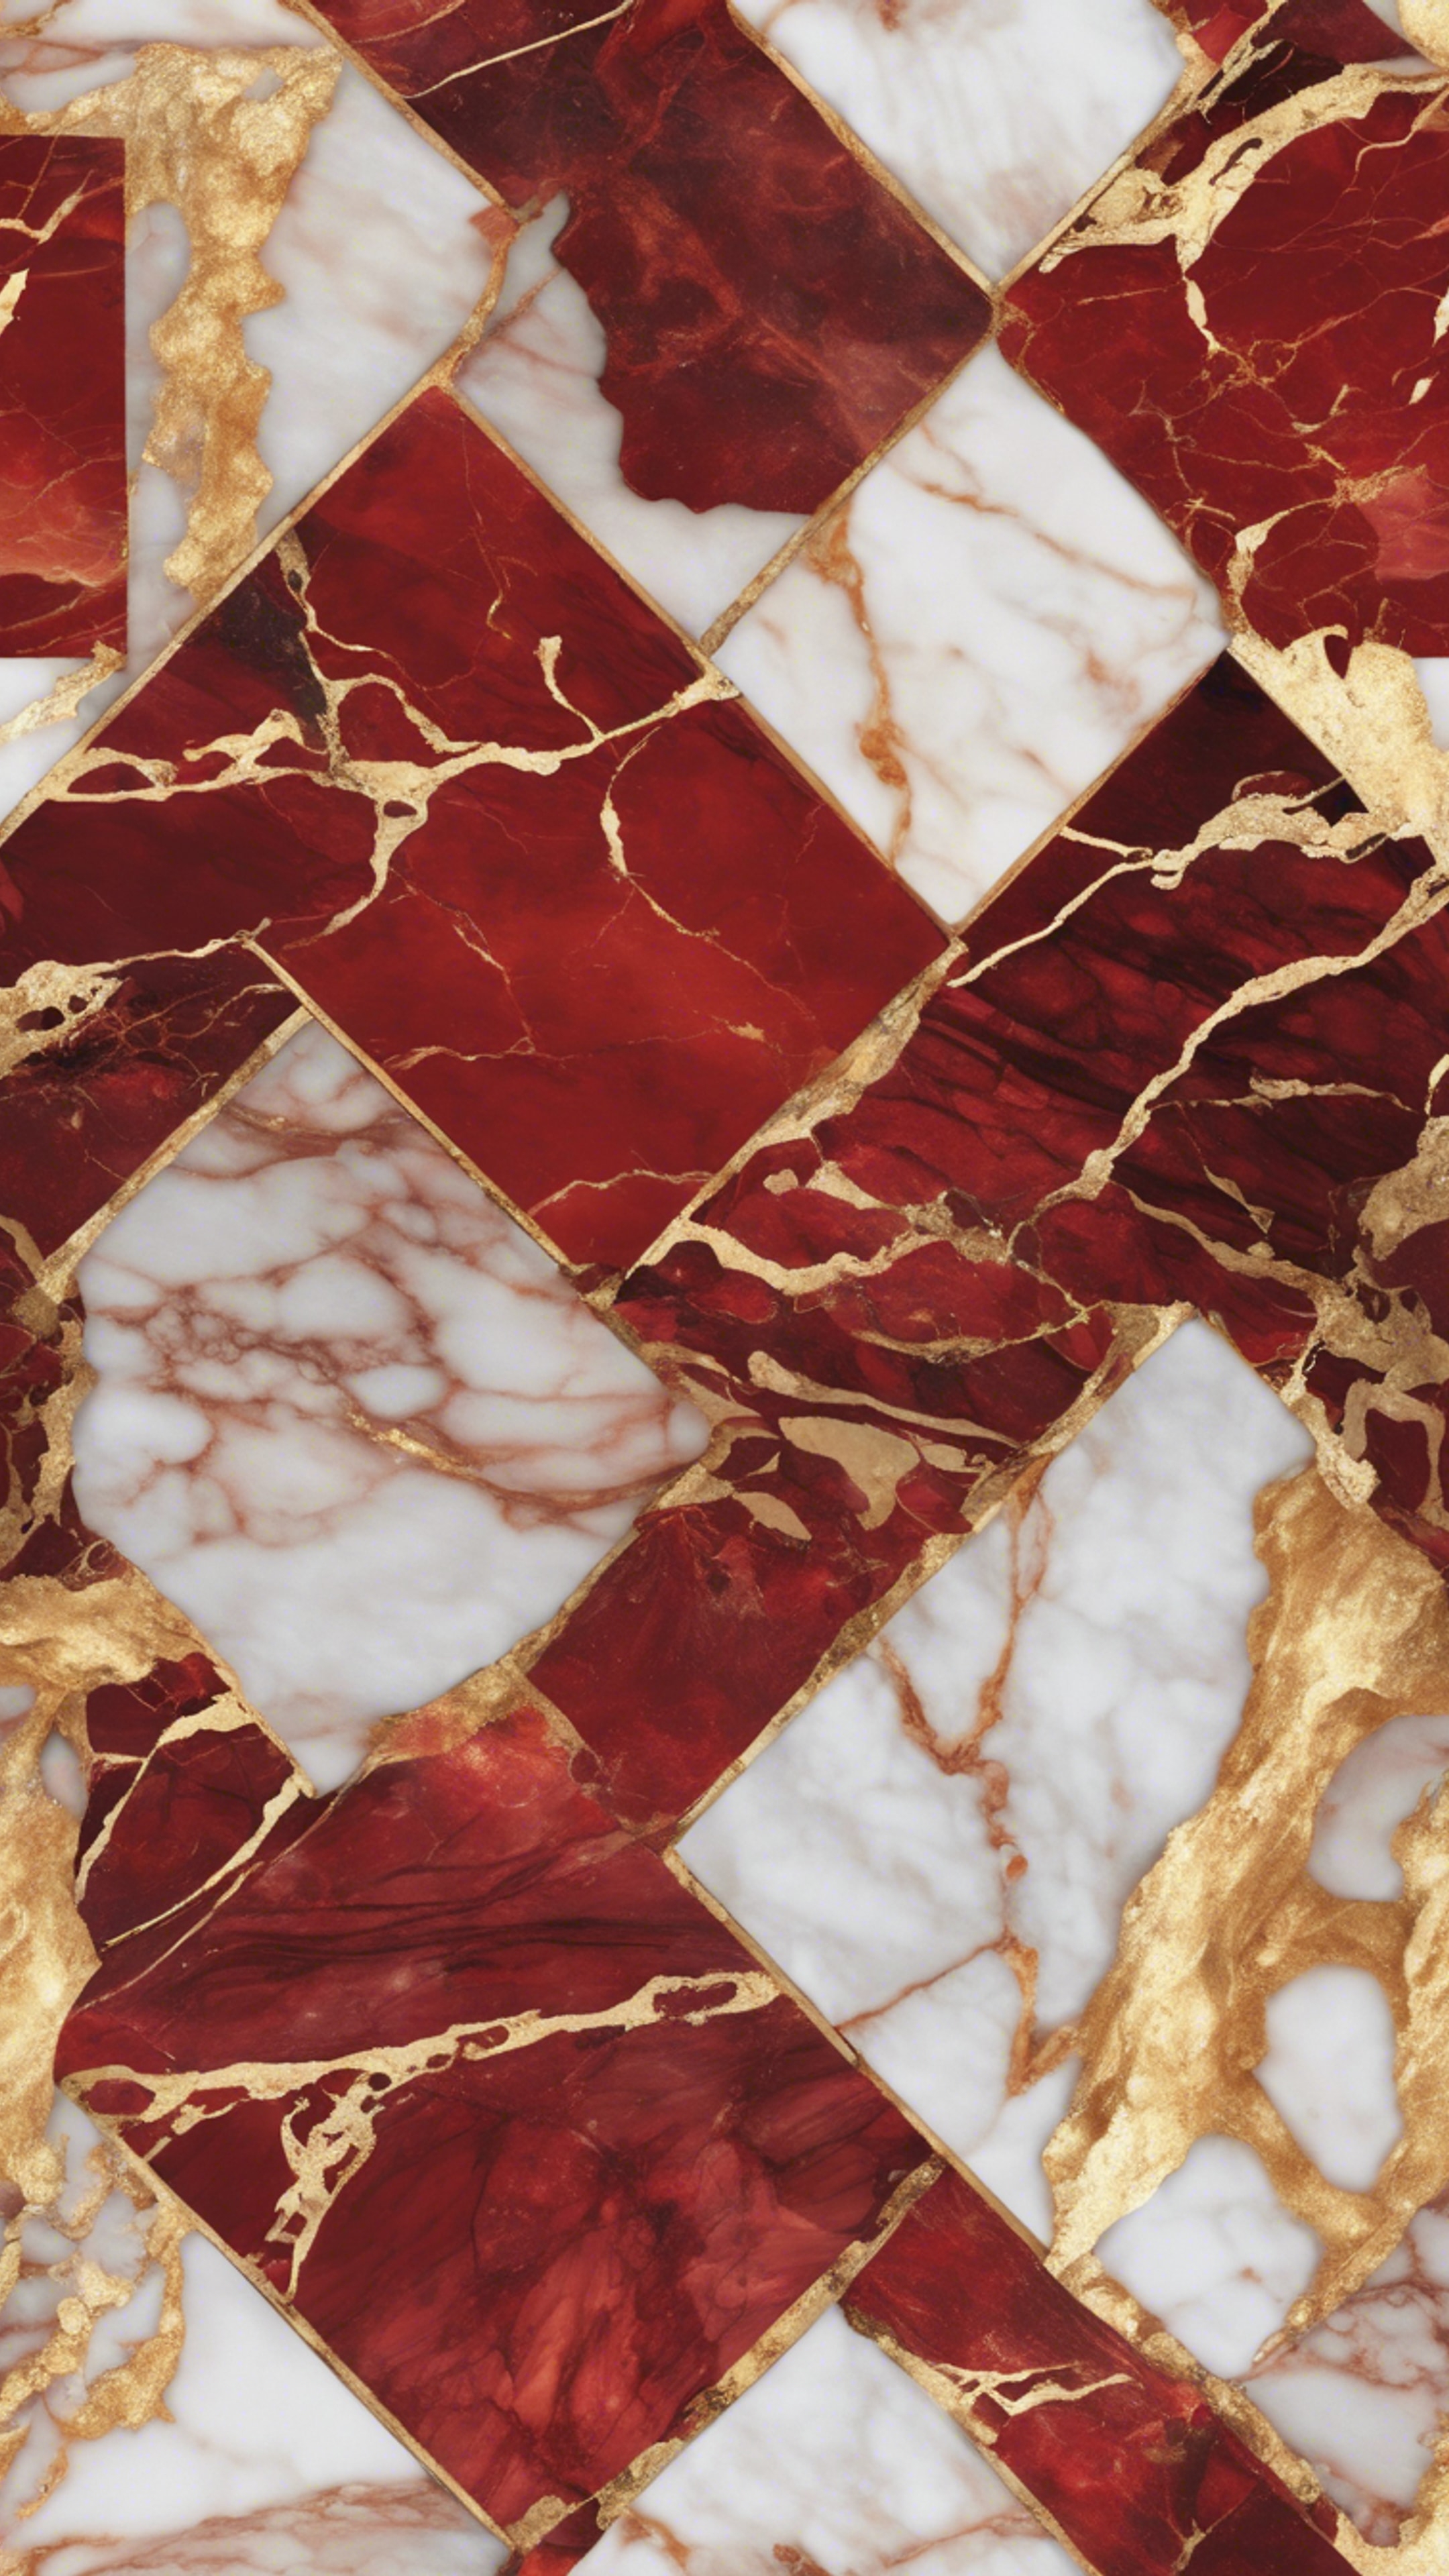 Seamless pattern of red and gold marble resembling the interior of an opulent mansion. Hintergrund[0c55d253d85d467eb81b]